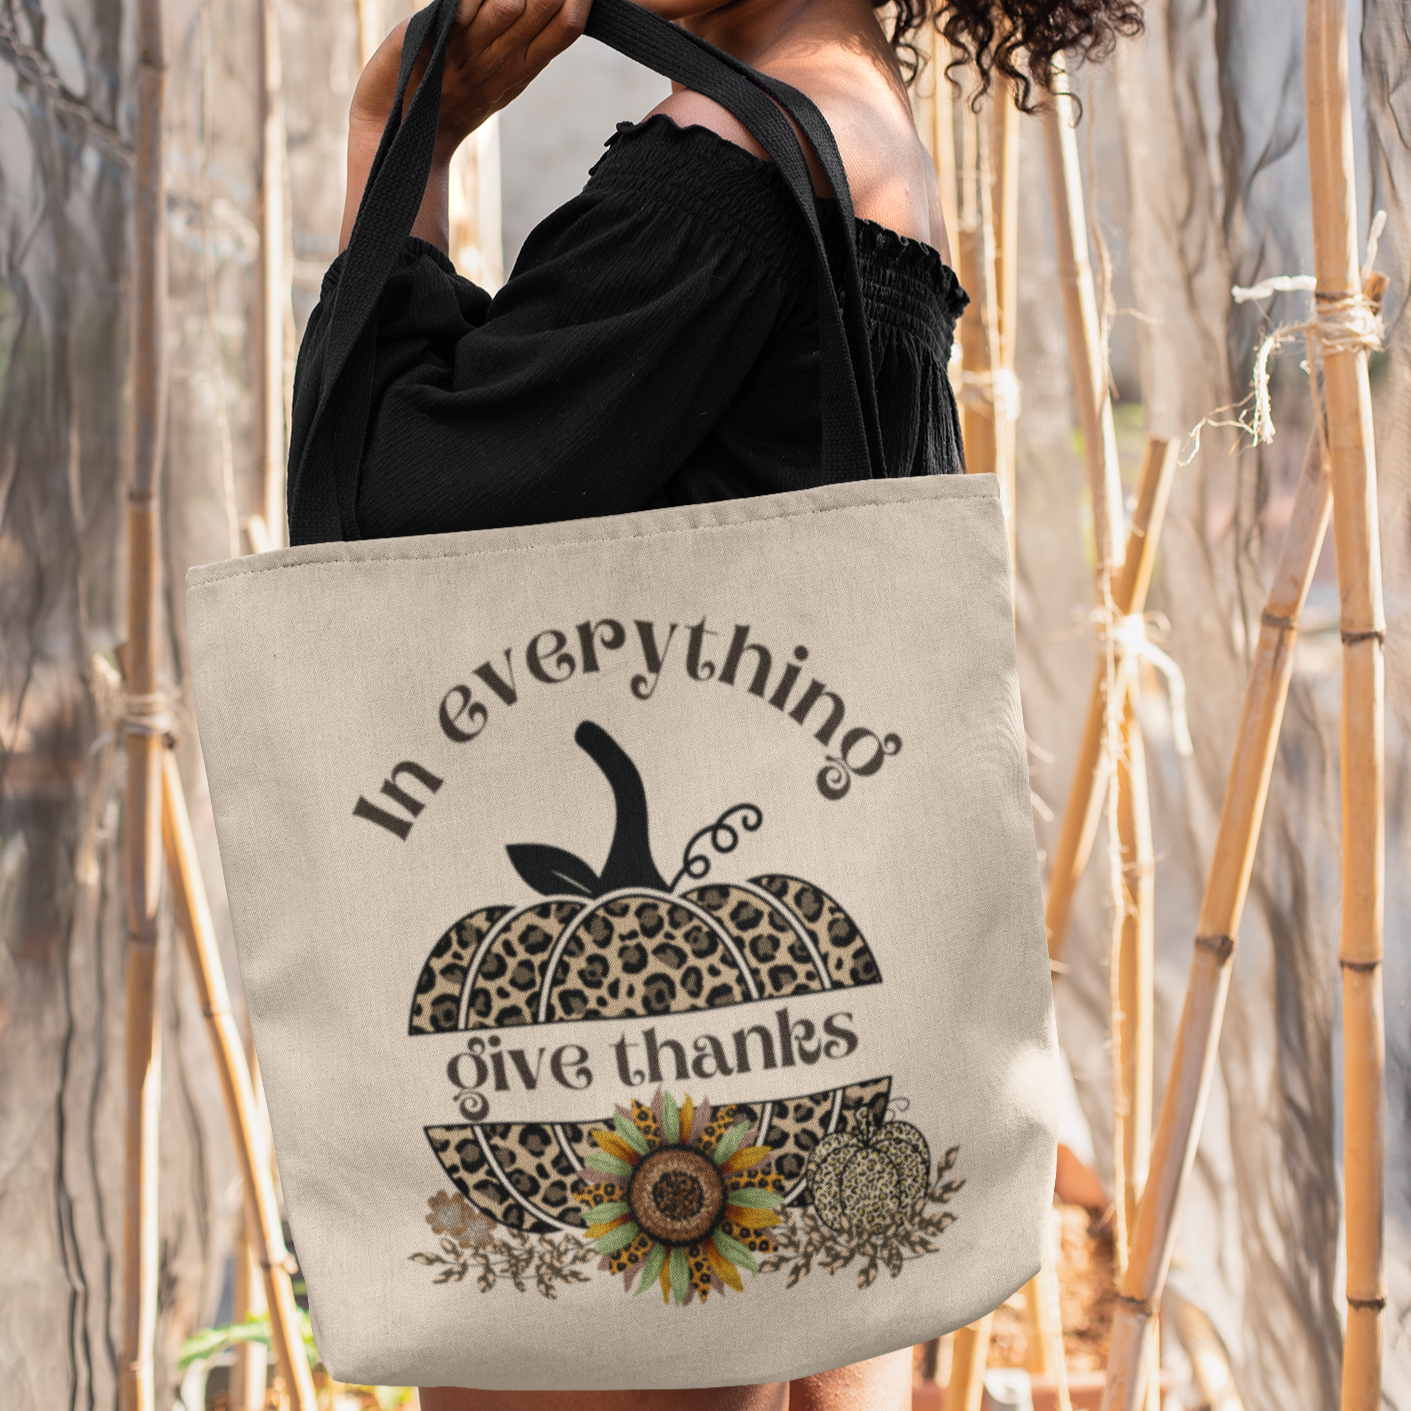 Christian Inspired Tote Bag | In Everything Give Thanks Bag With Split Pumpkin